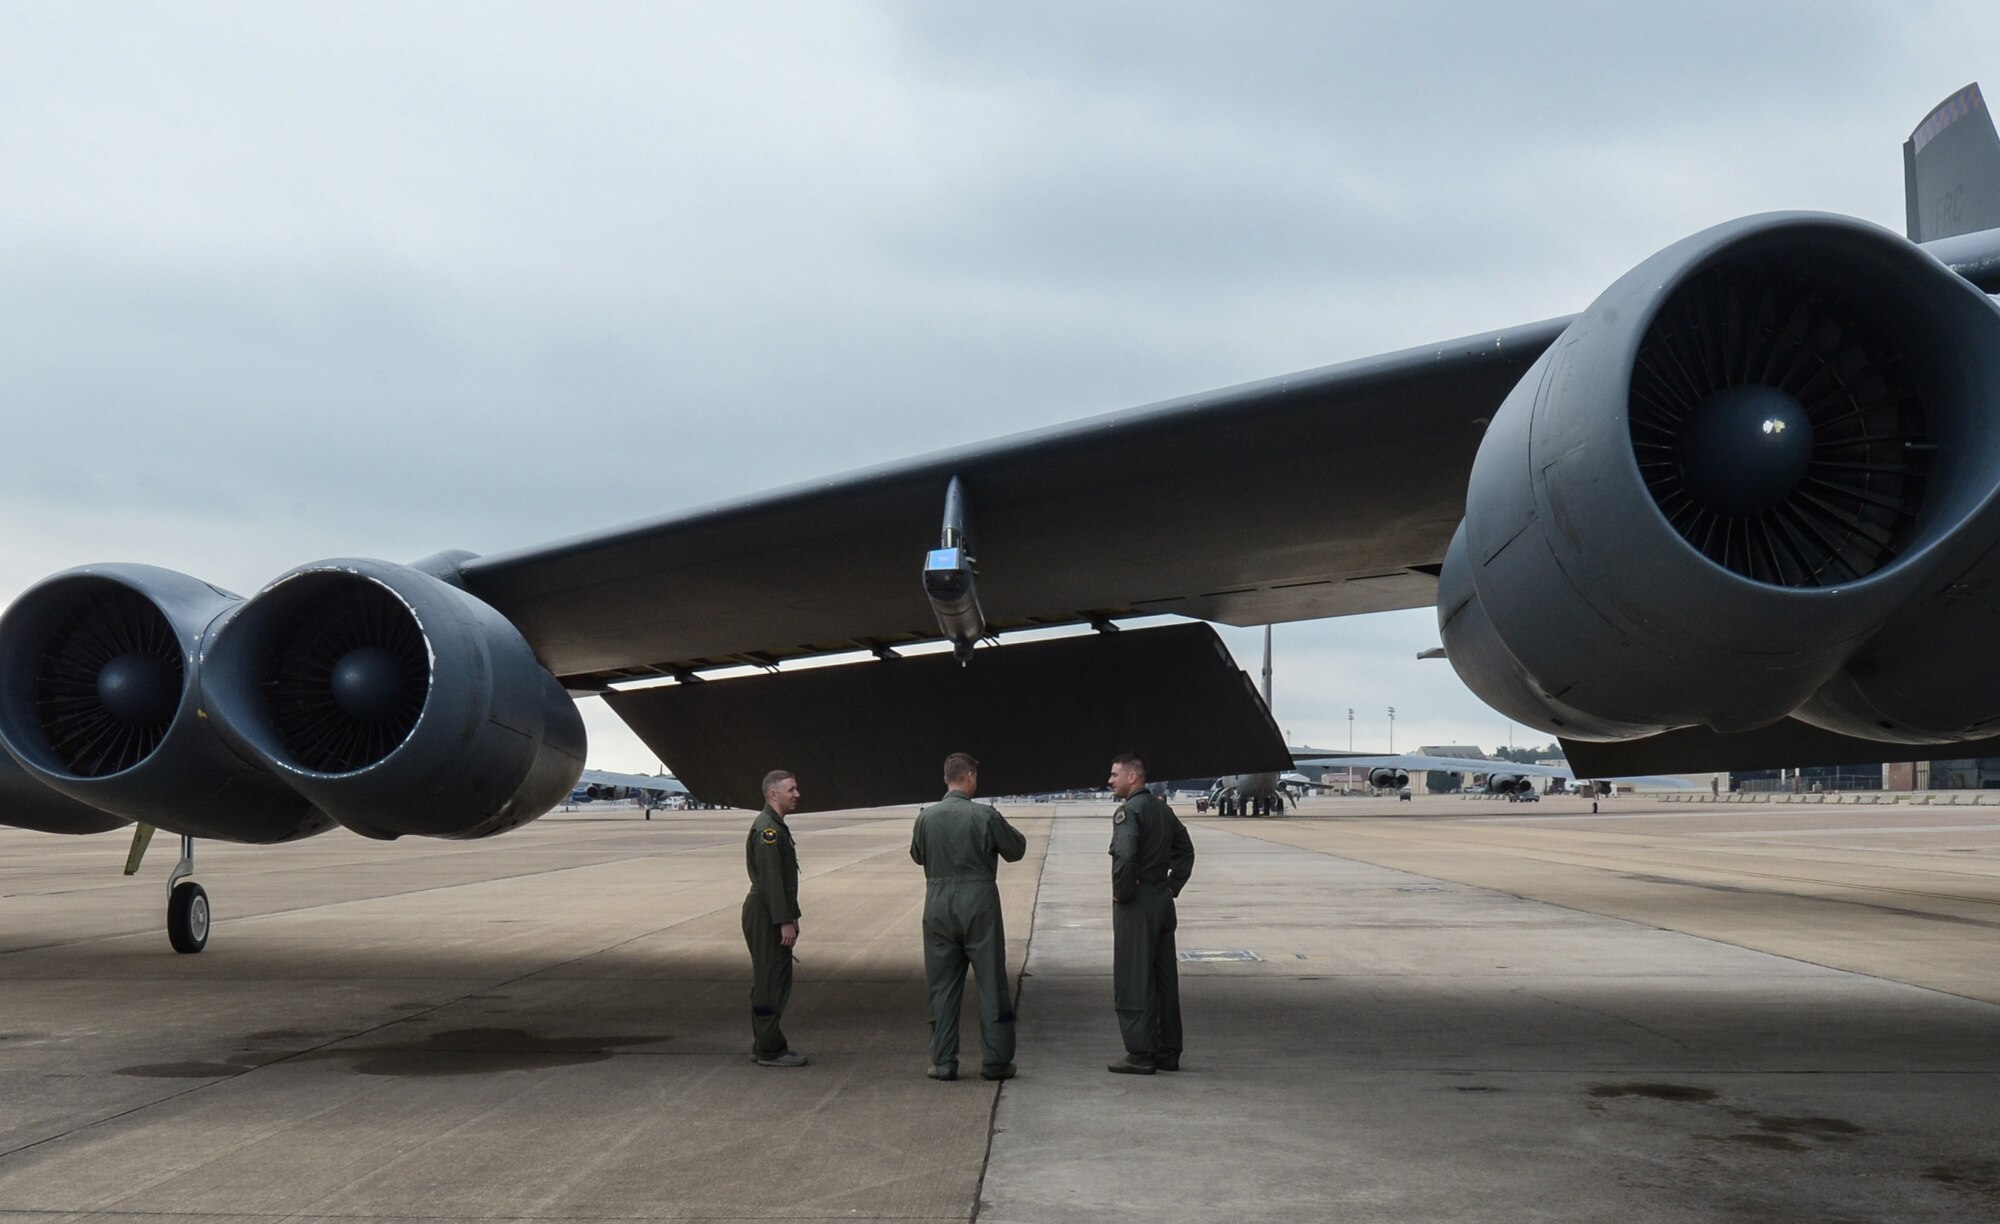 Aircrew from various airframes learn about the capabilities of a B-52 Stratofortress before a weapons school integration flight at Barksdale Air Force Base, La., Oct. 13, 2016. The integration was the capstone event of a six-month training course, involving extensive communication planning across more than 10 agencies within the bomber community, followed by a live fly exercise with two B-1 Lancers from Dyess Air Force Base, Texas, and two B-52 Stratofortresses from Barksdale. (U.S. Air Force photo/Senior Airman Curt Beach)